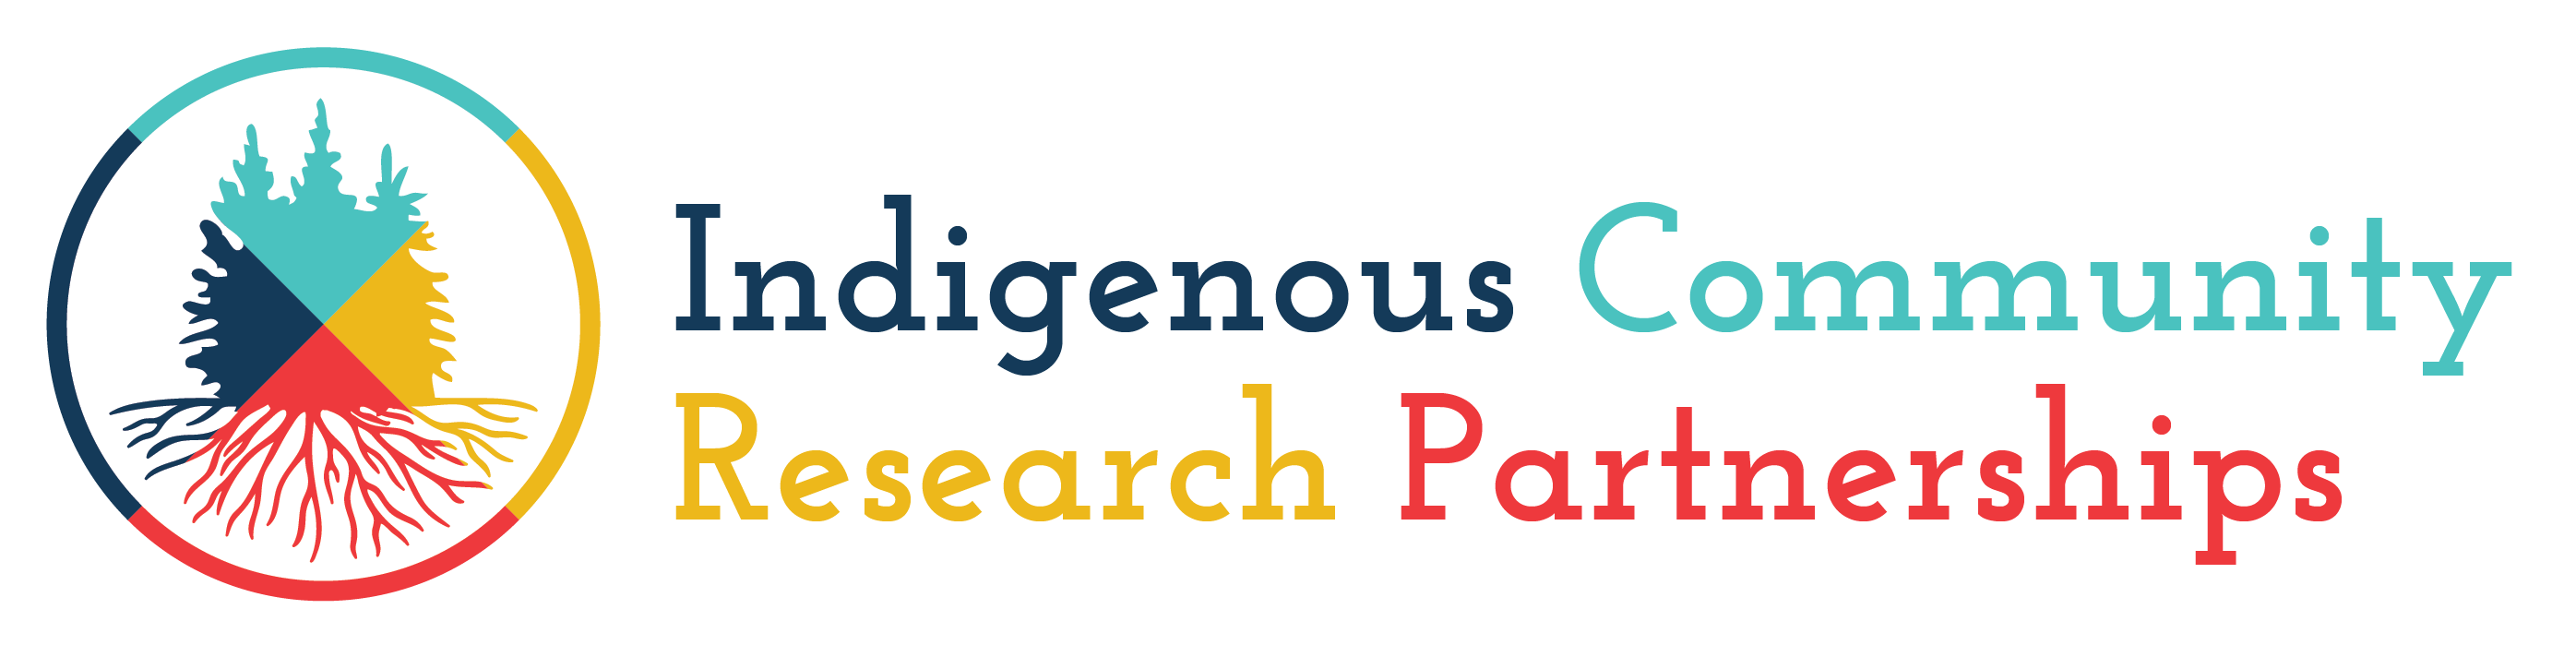 Indigenous Community Research Partnerships